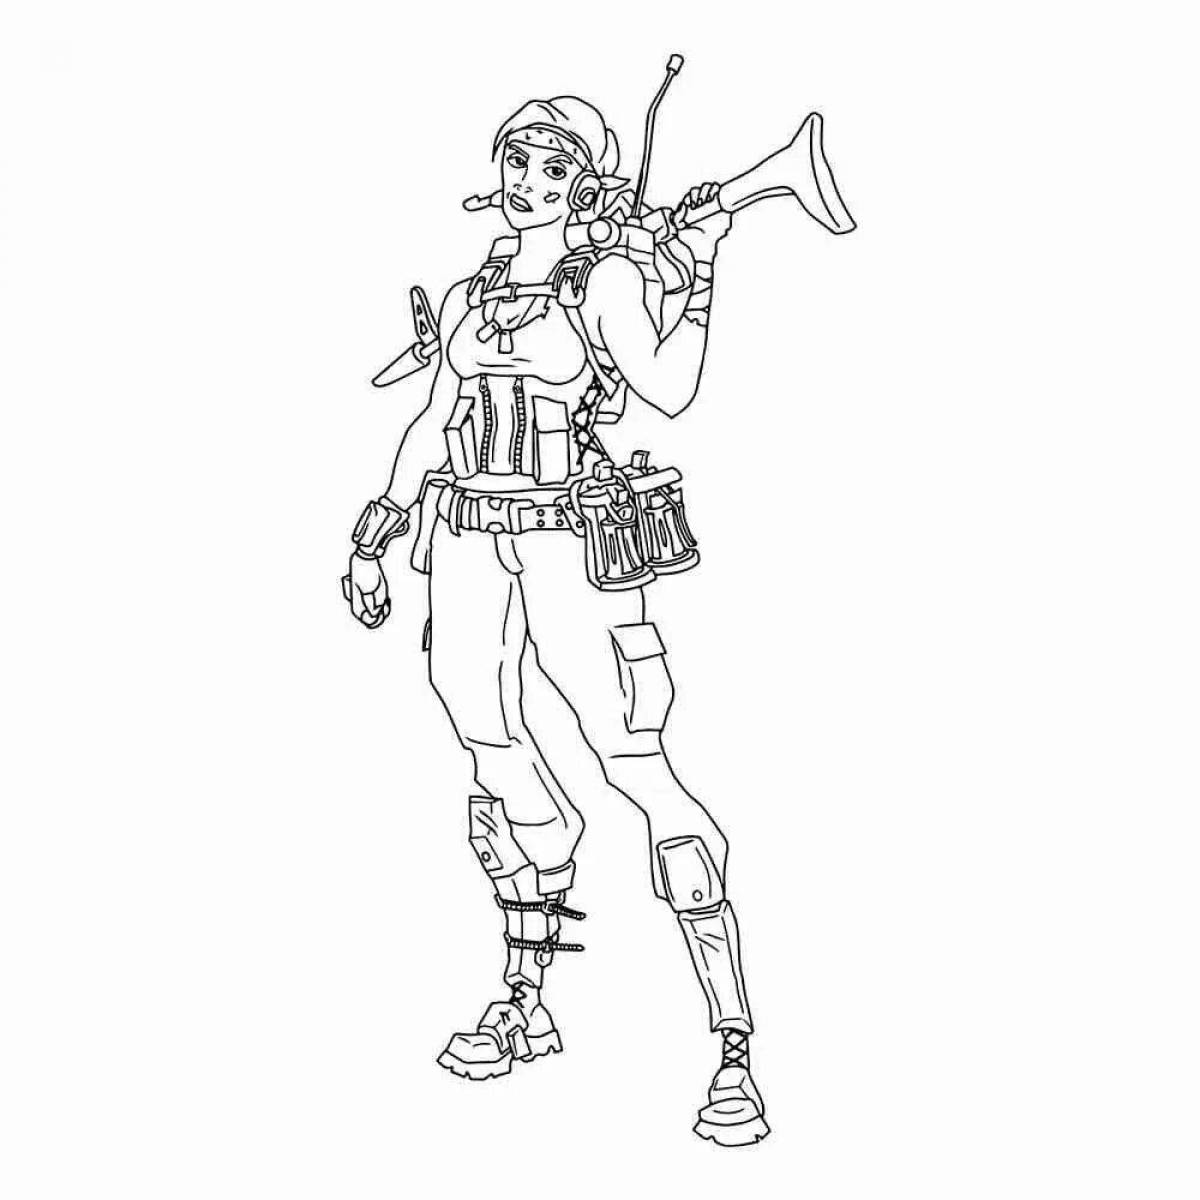 Fabulous free fire character coloring pages